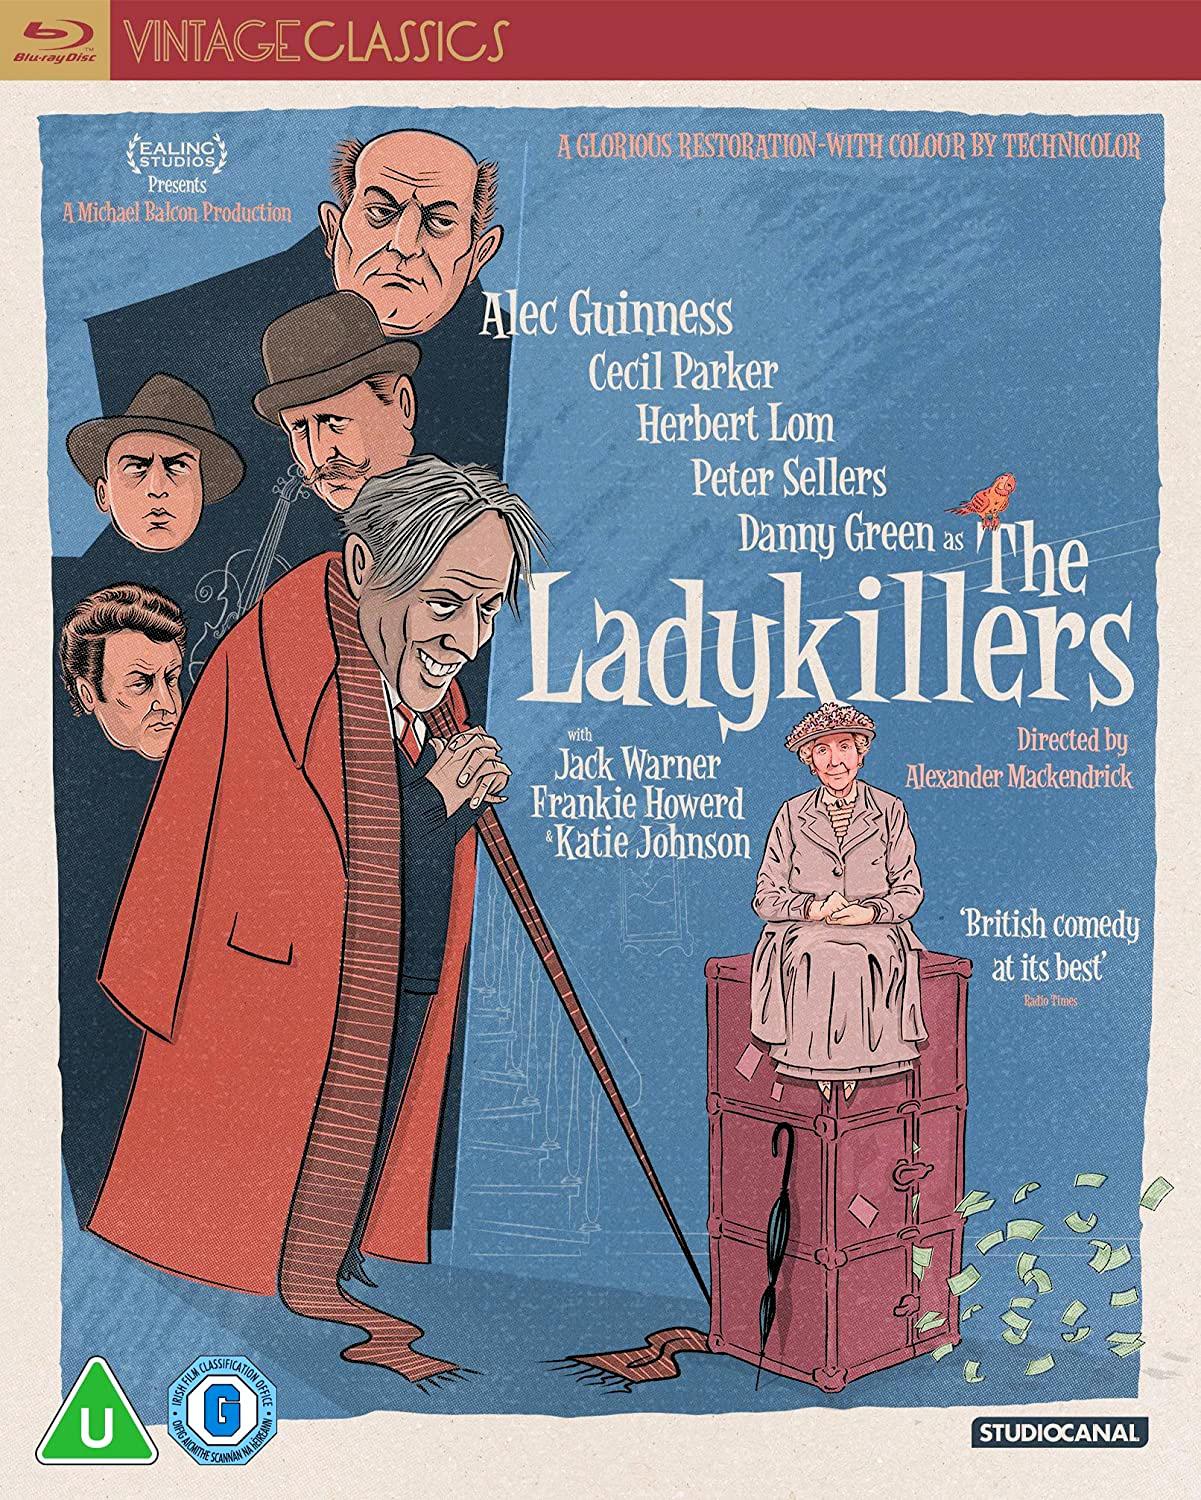 The Ladykillers (1955) Blu-ray cover from Studiocanal [2020] (1)